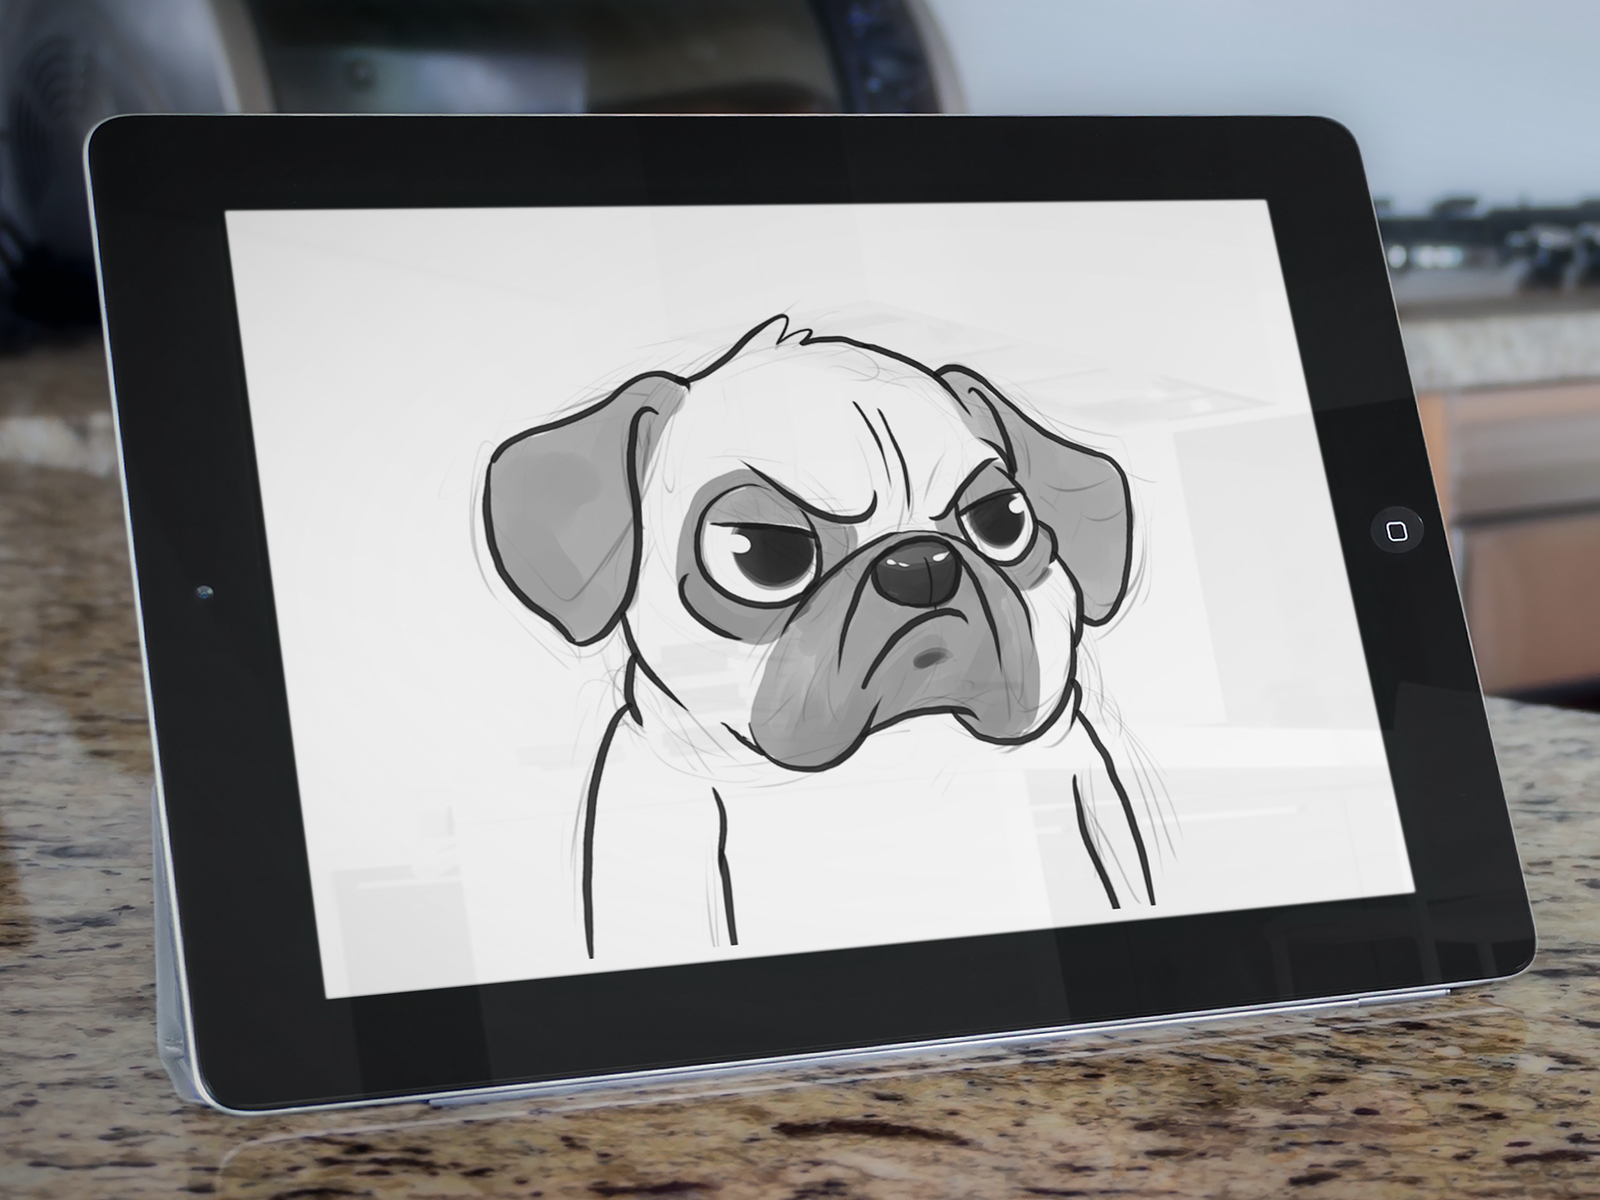 Cartoon mascot of a angry dog by abrang on Dribbble